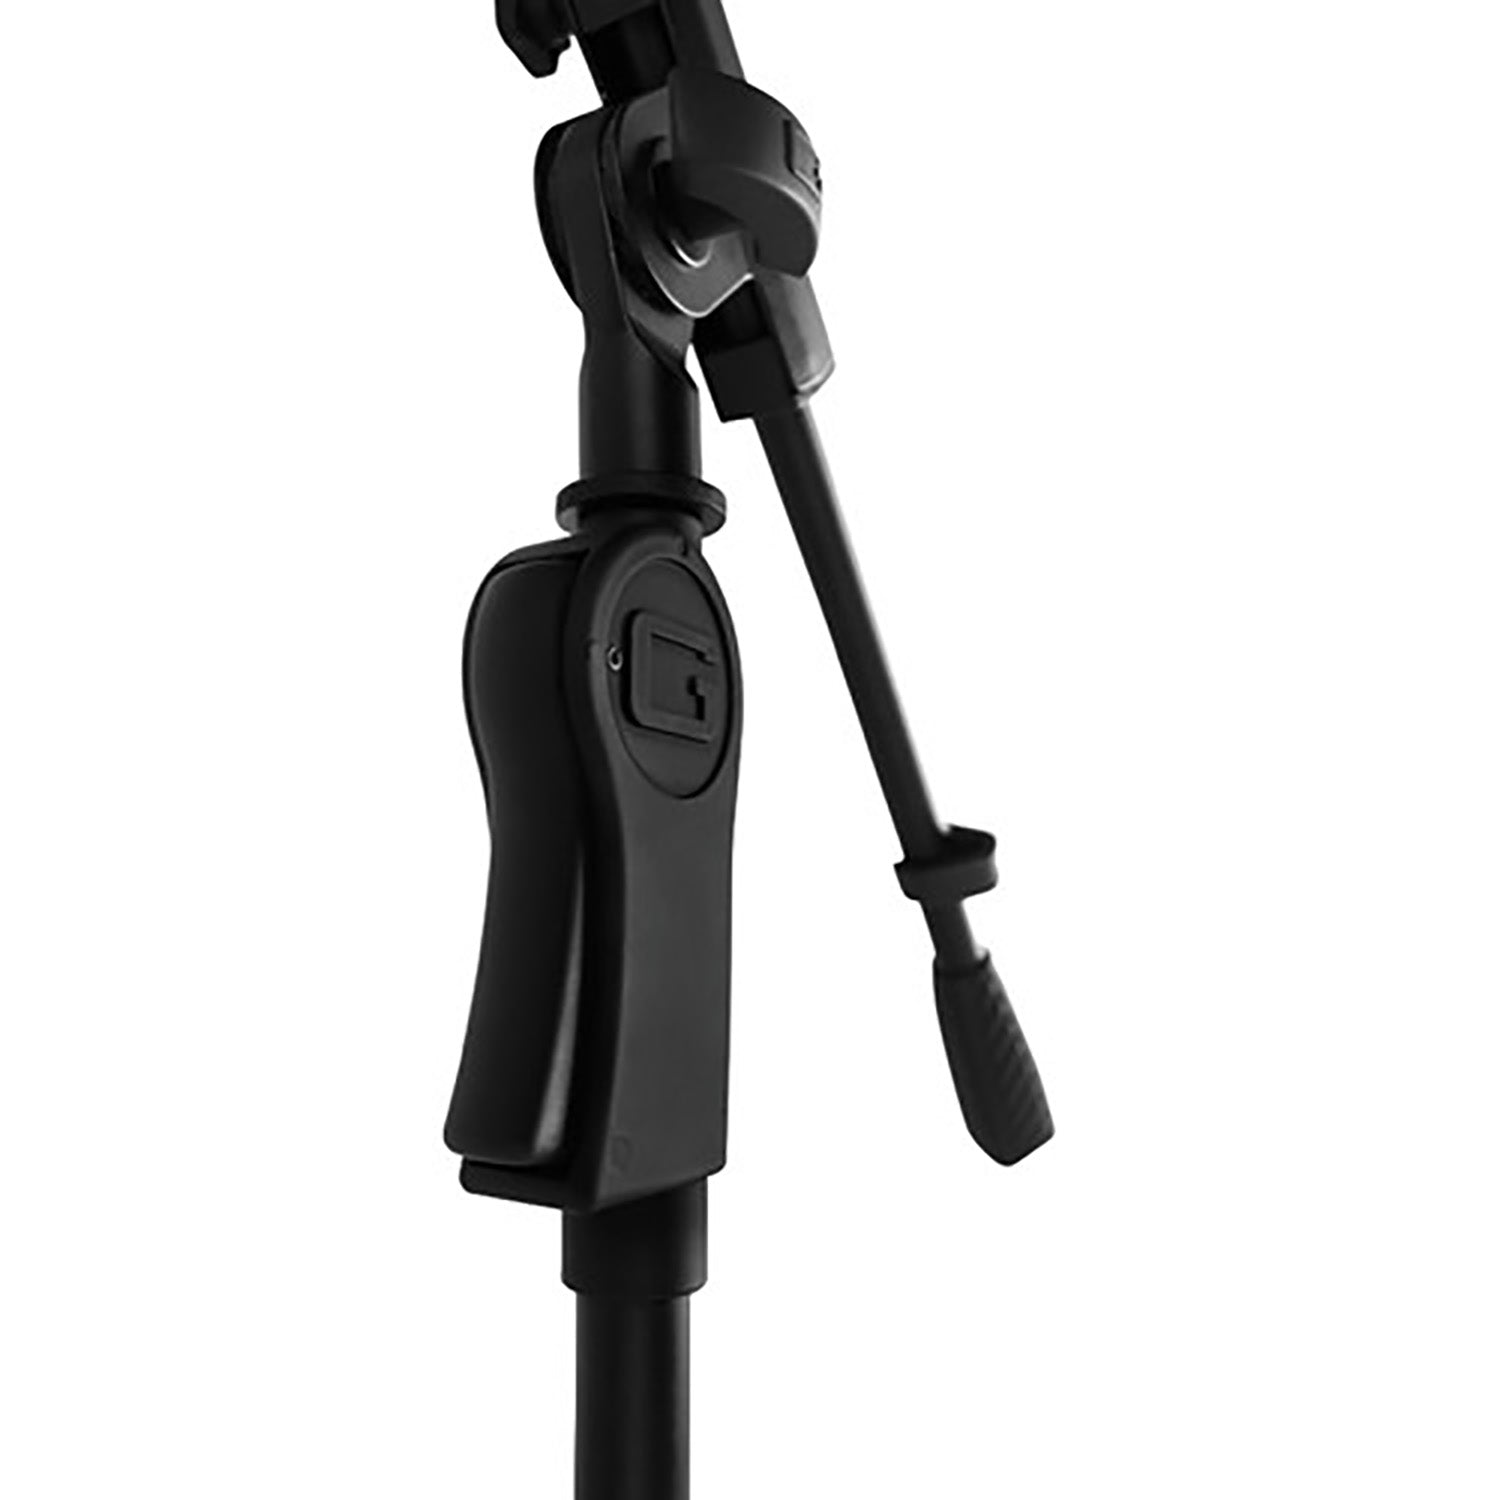 Gator Frameworks GFW-MIC-2120 Deluxe Tripod Mic Stand with Telescoping Boom - Hollywood DJ